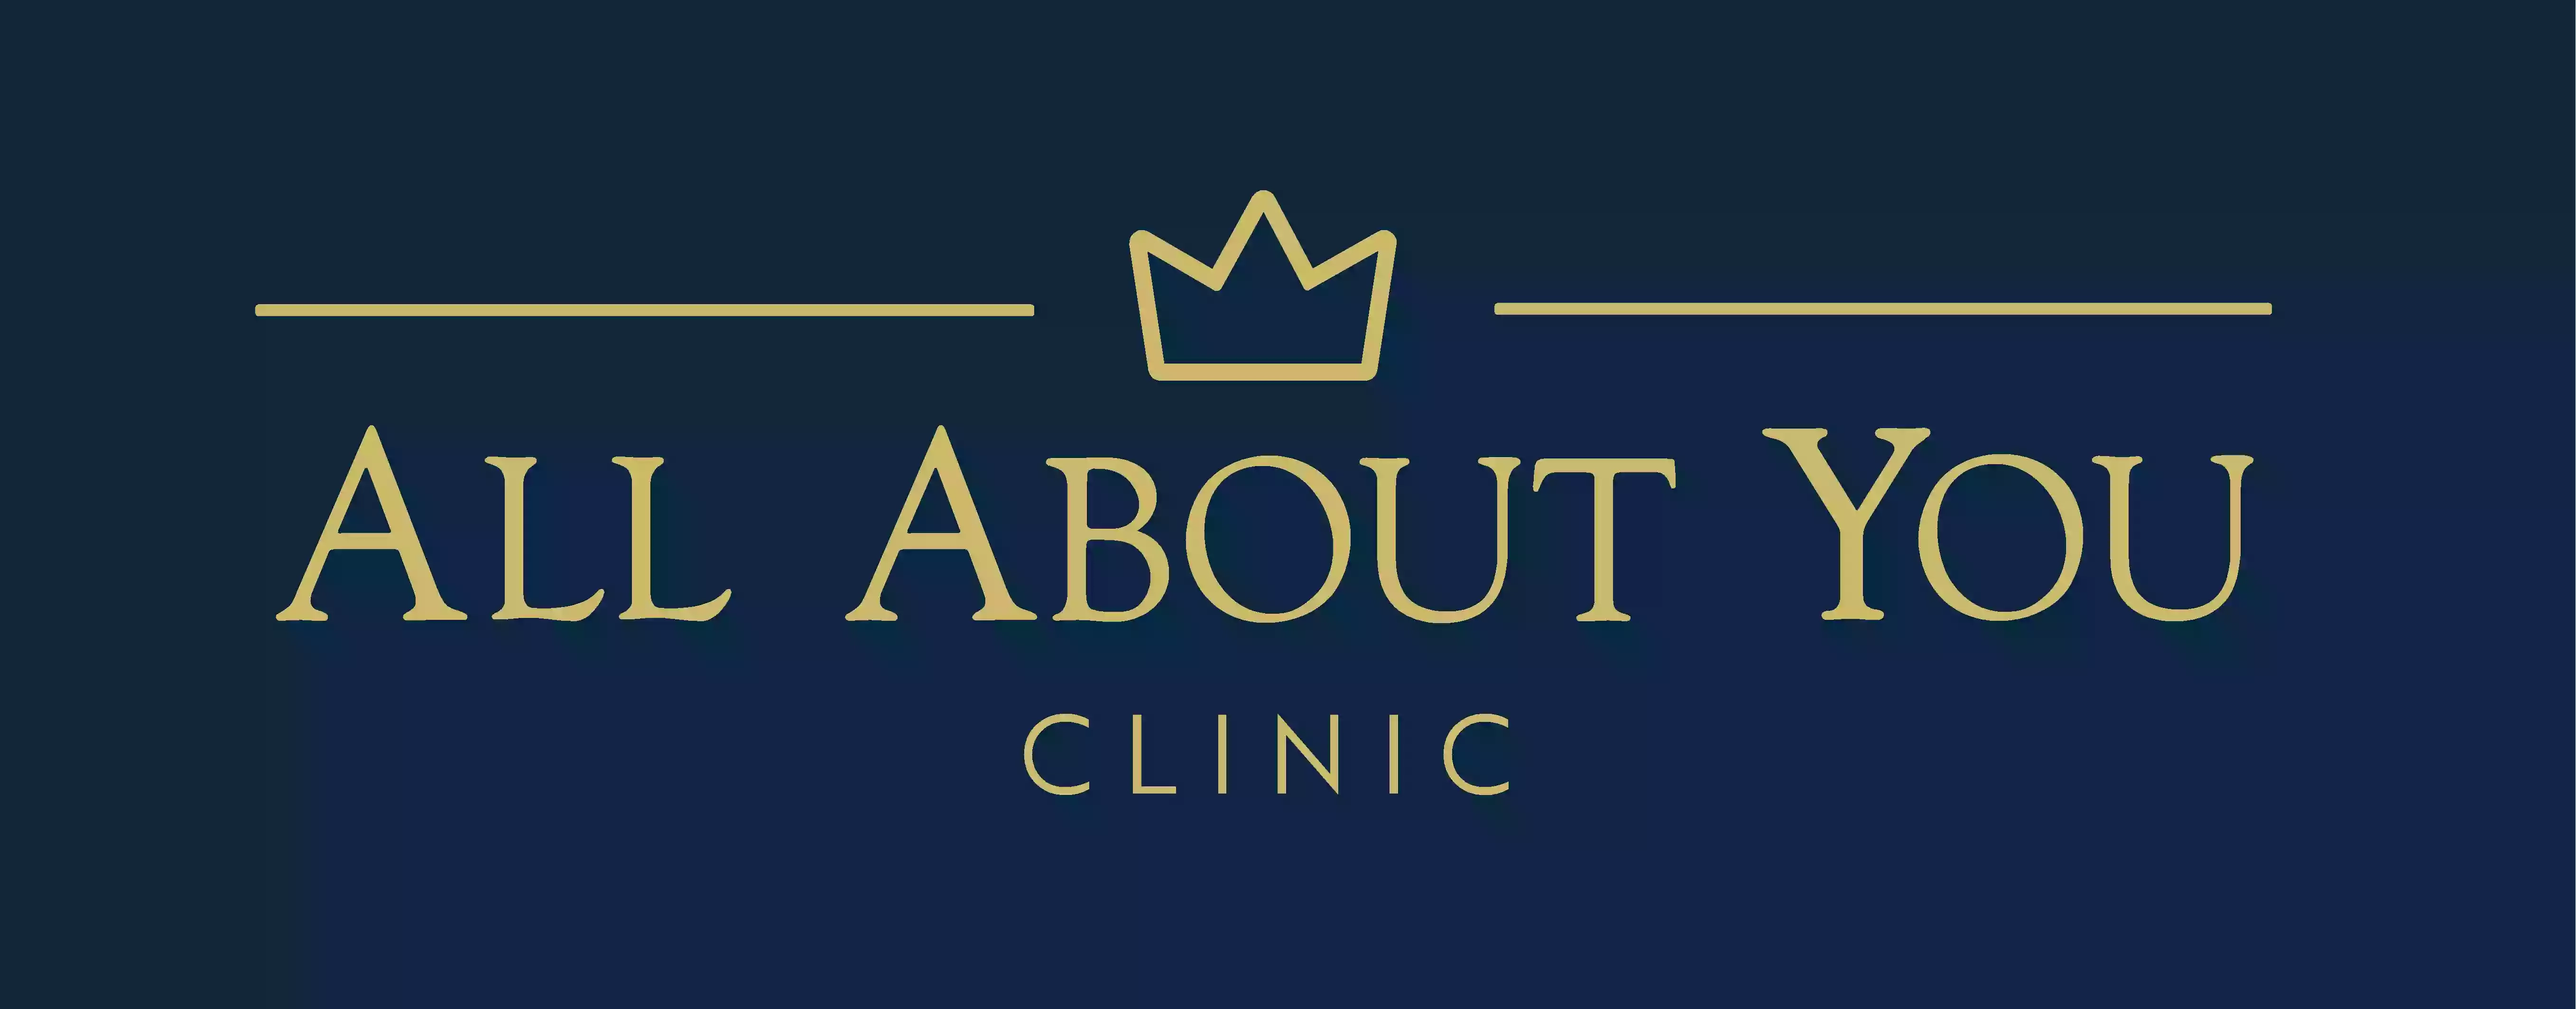 All About You Clinic